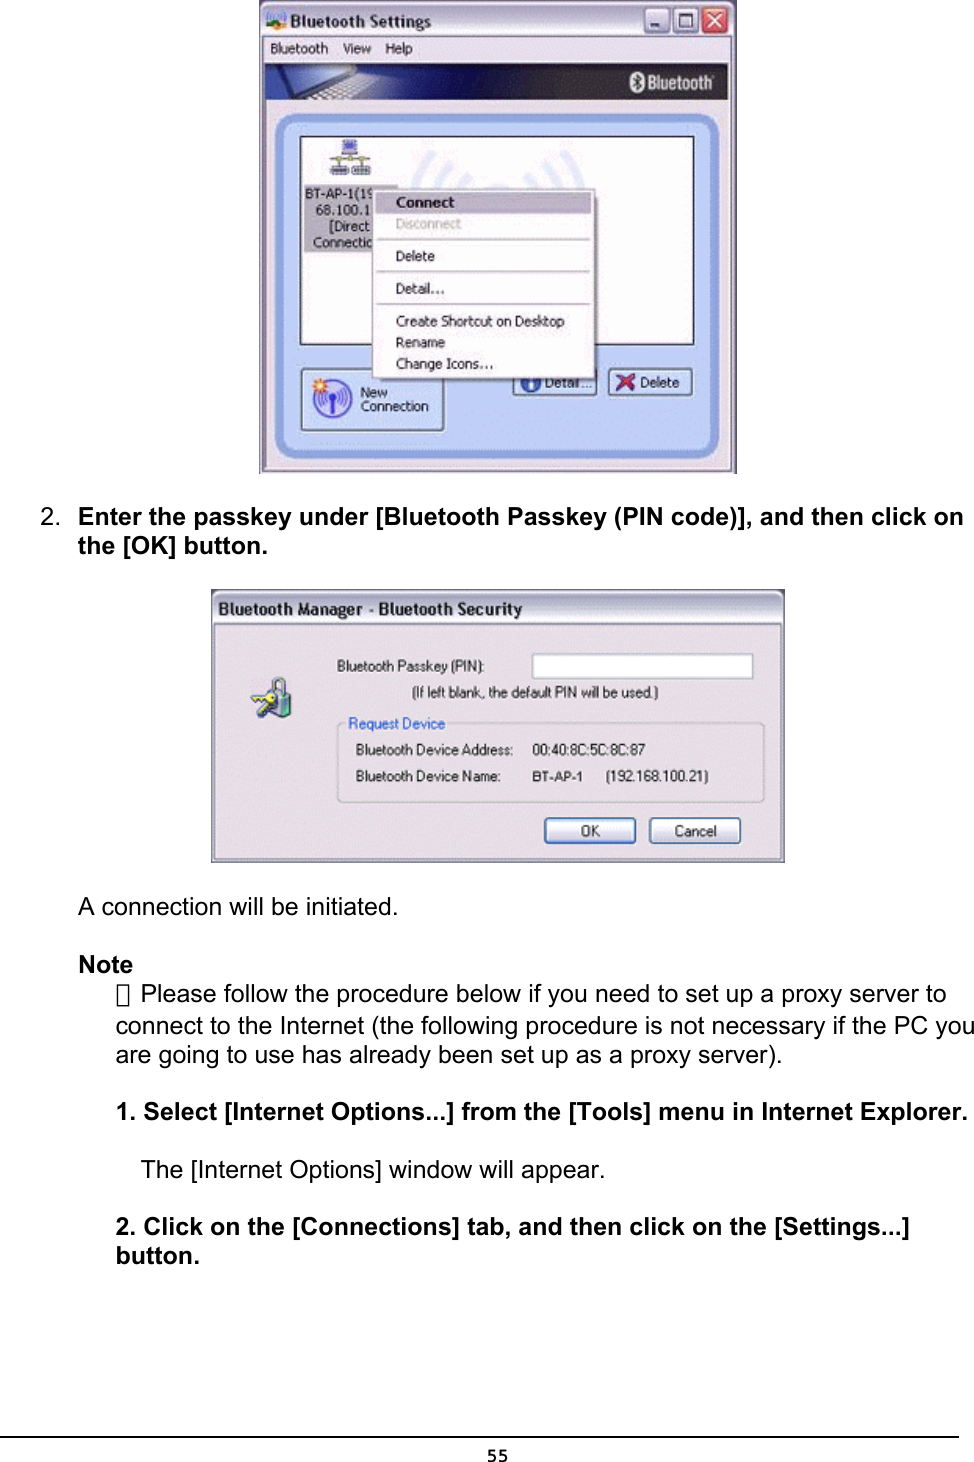   2.  Enter the passkey under [Bluetooth Passkey (PIN code)], and then click on the [OK] button.  A connection will be initiated.   Note ．Please follow the procedure below if you need to set up a proxy server to connect to the Internet (the following procedure is not necessary if the PC you are going to use has already been set up as a proxy server).  1. Select [Internet Options...] from the [Tools] menu in Internet Explorer.   The [Internet Options] window will appear.  2. Click on the [Connections] tab, and then click on the [Settings...] button.  55